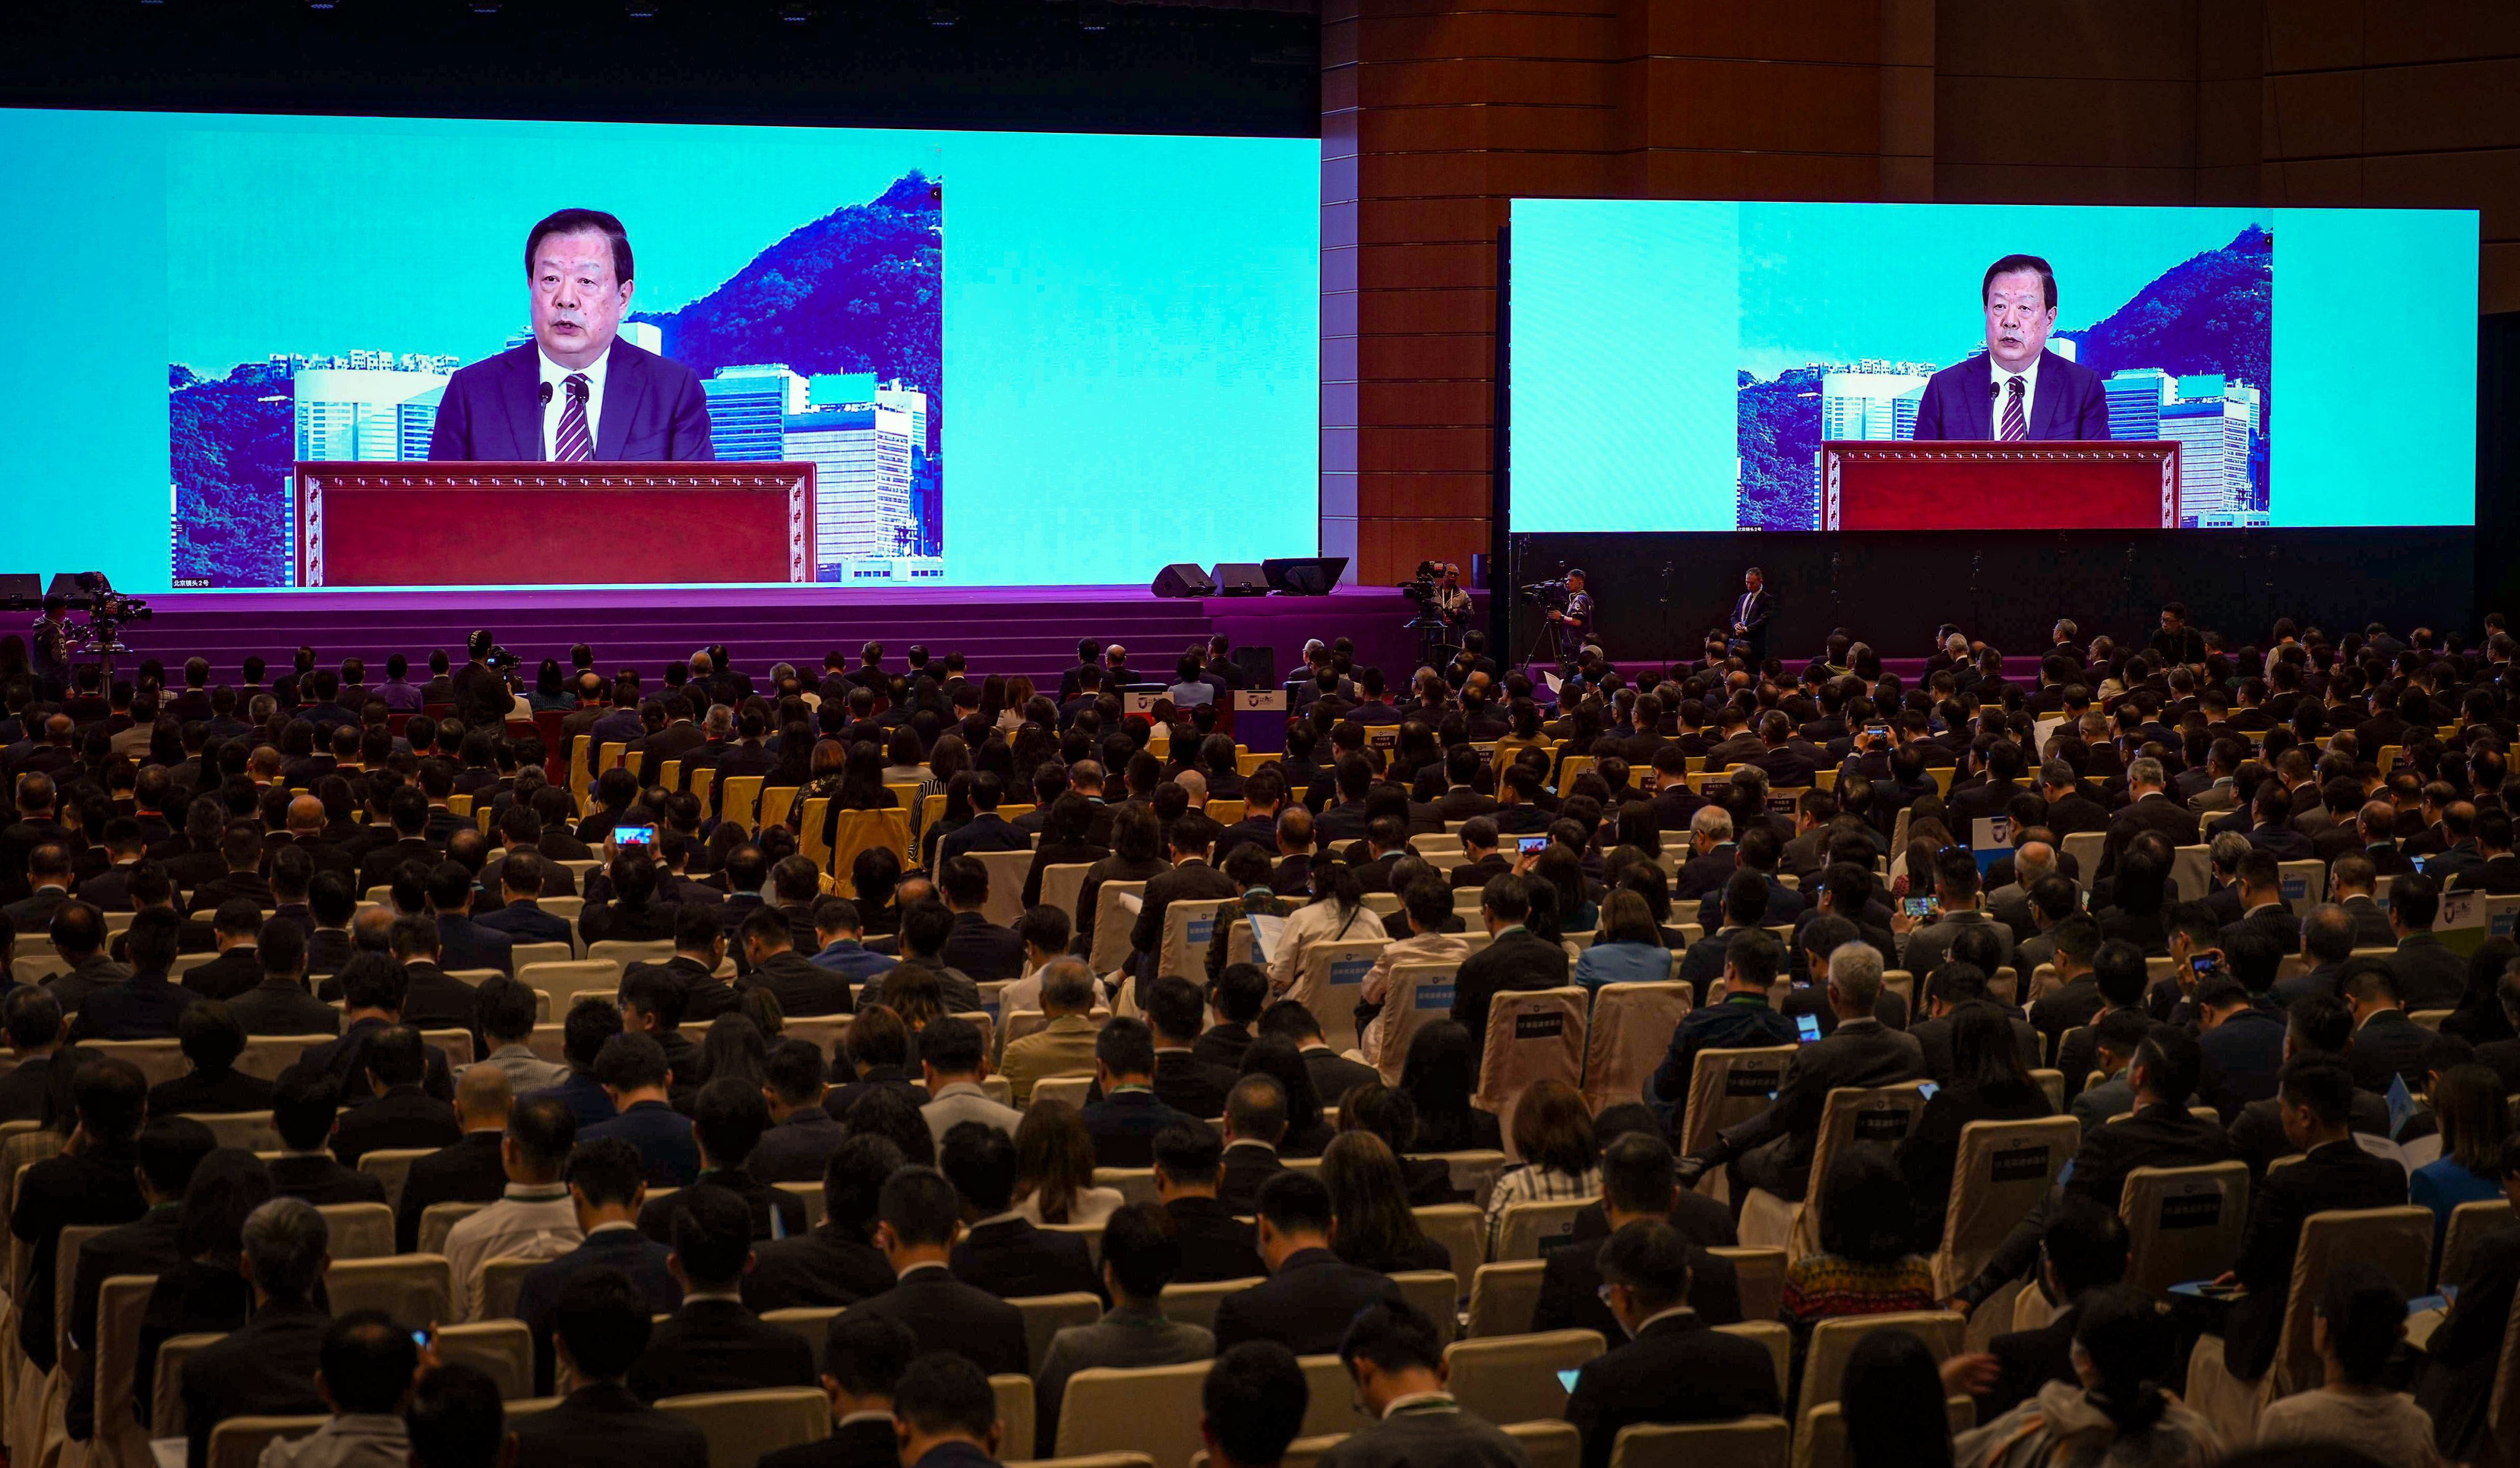 Xia Baolong, the director of the Hong Kong and Macau Affairs Office, delivers a speech by video link for the National Security Education Day opening ceremony. Photo: Eugene Lee